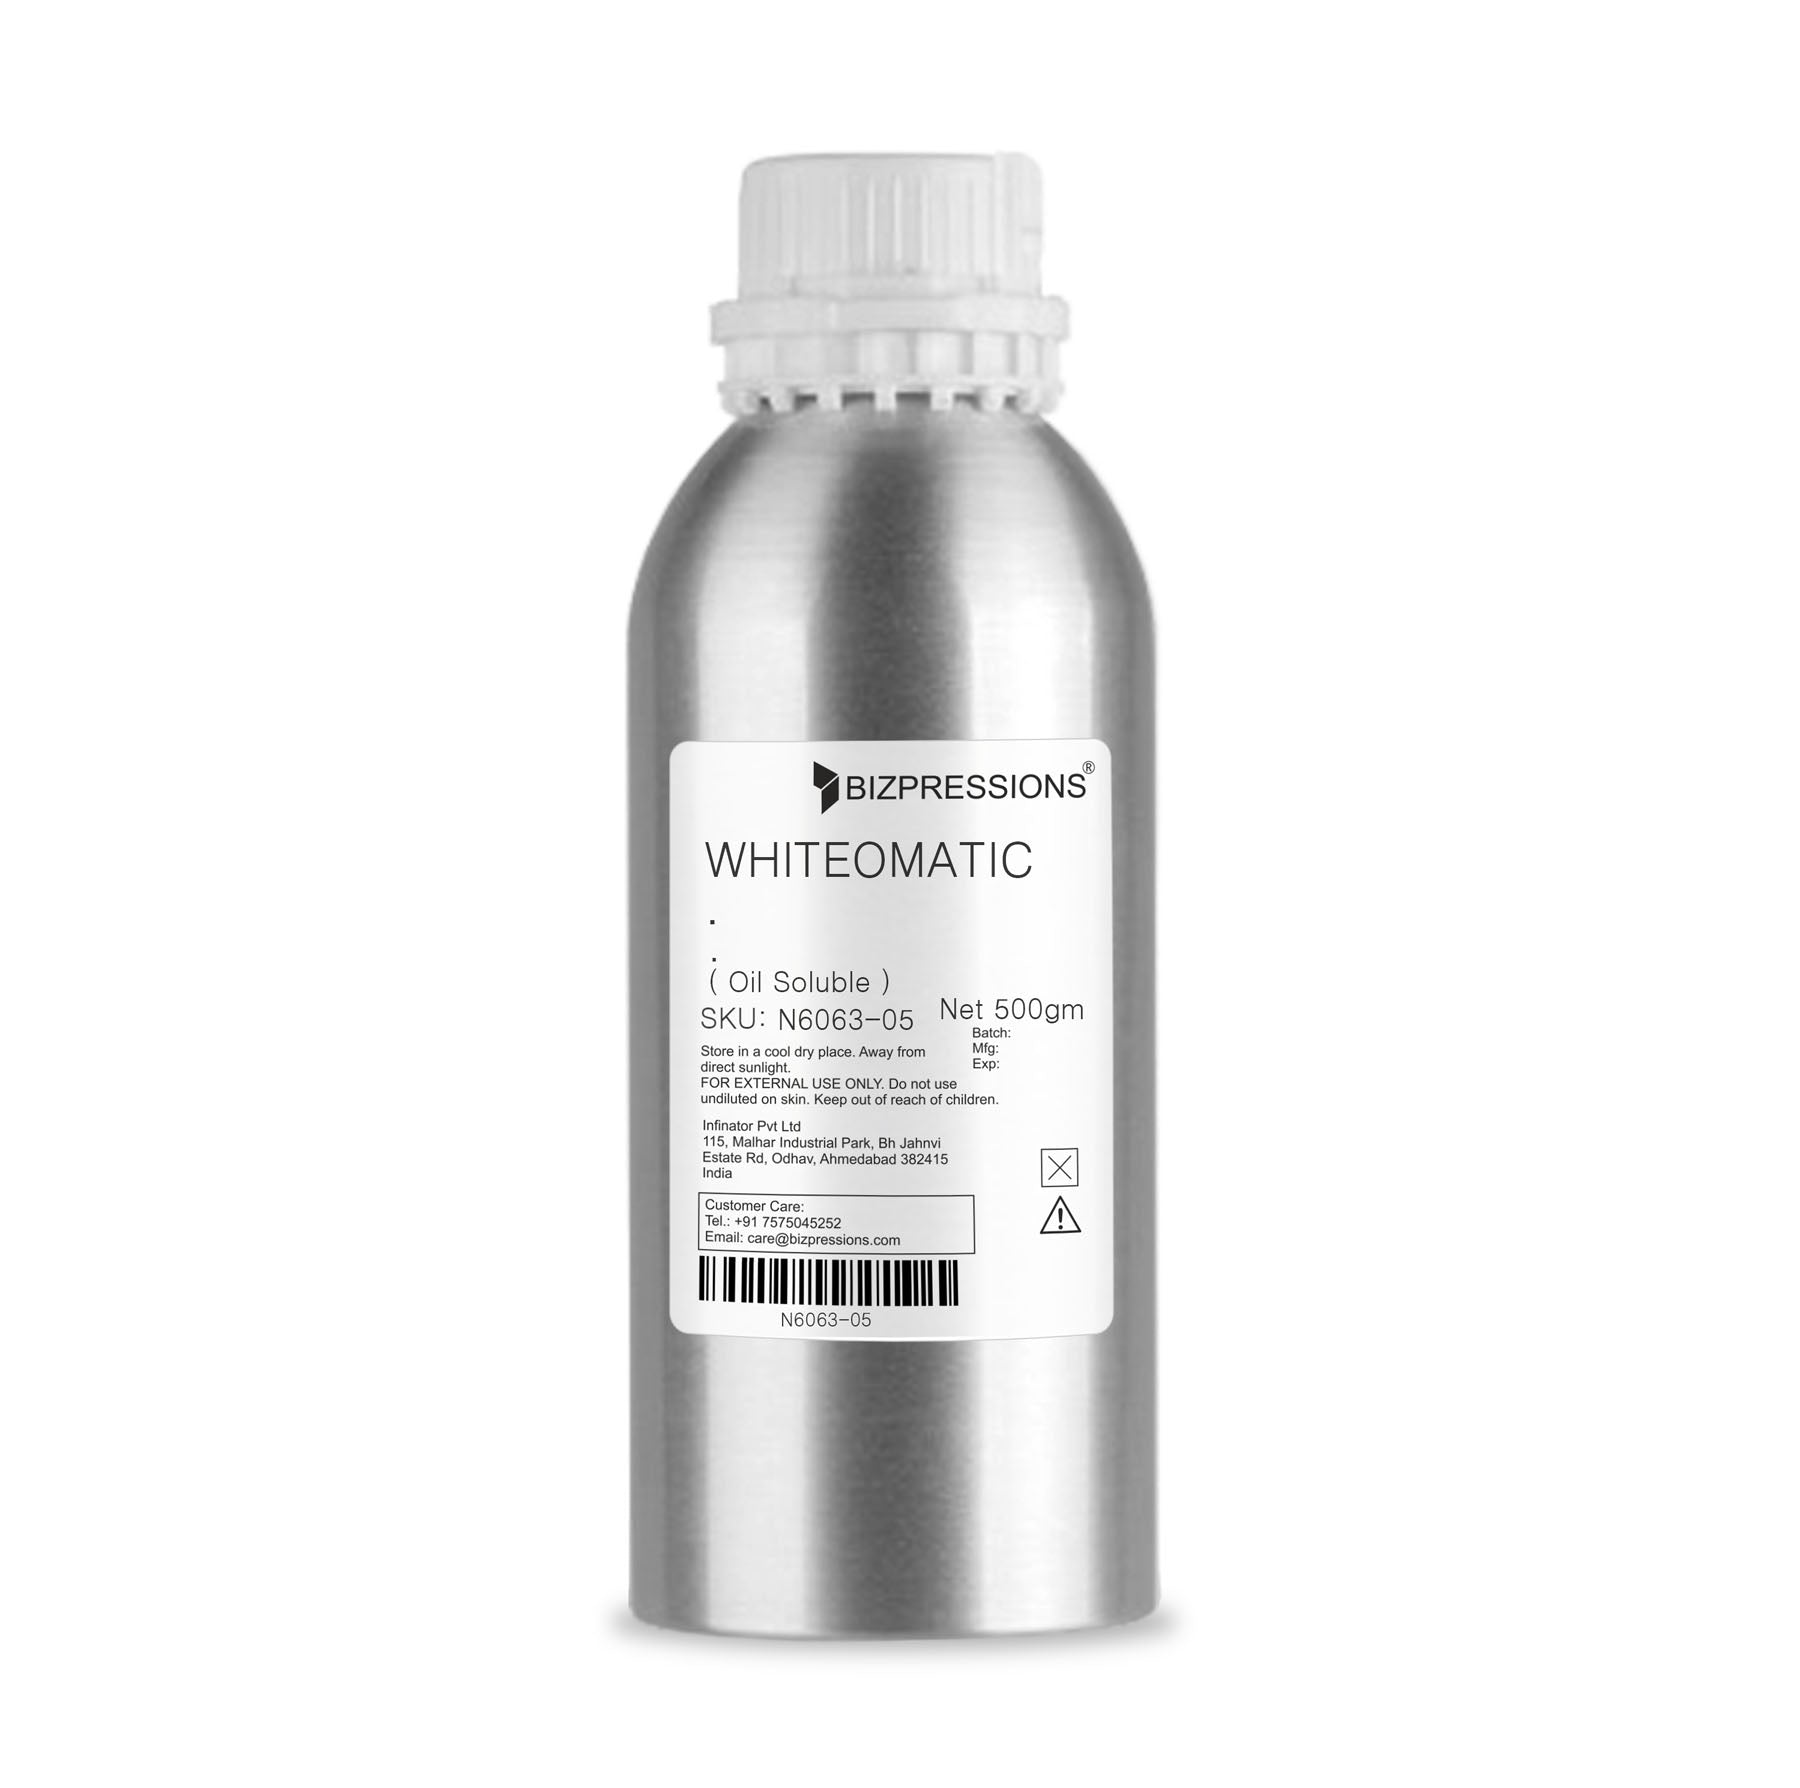 WHITEOMATIC - Fragrance ( Oil Soluble ) - 500 gm